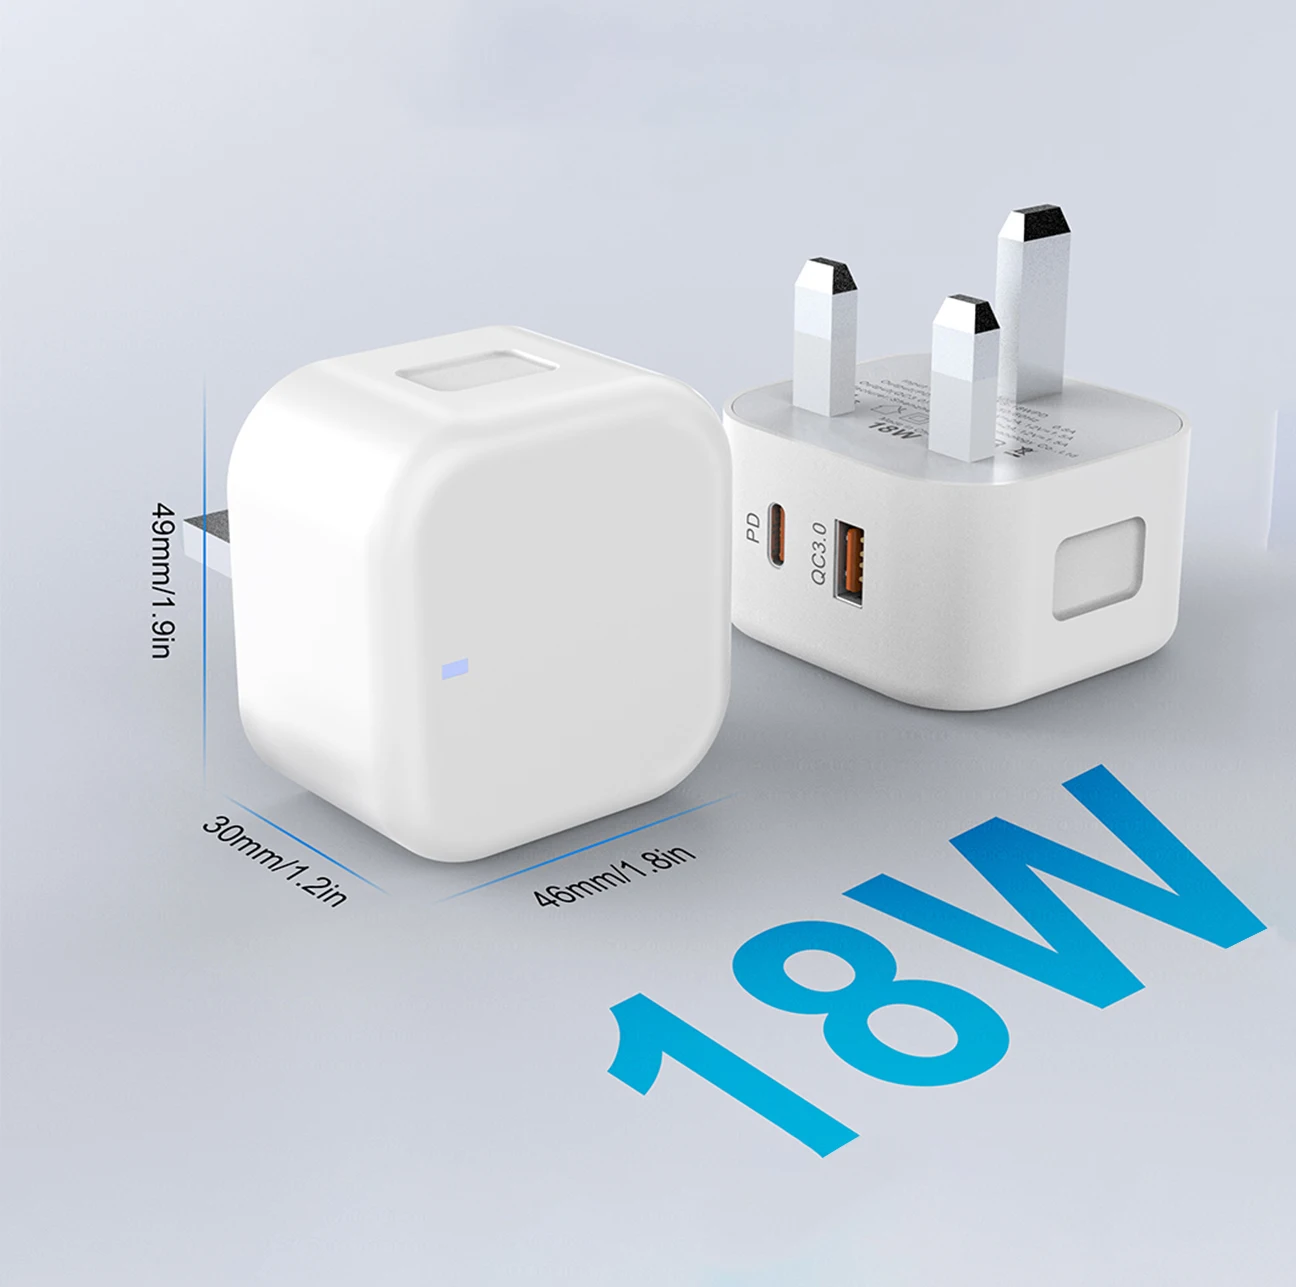 

2021 New Arrivals Electronics EU UK US AU JP India Plug Adapter 20W Type C PD USB C Wall Charger for iPhone